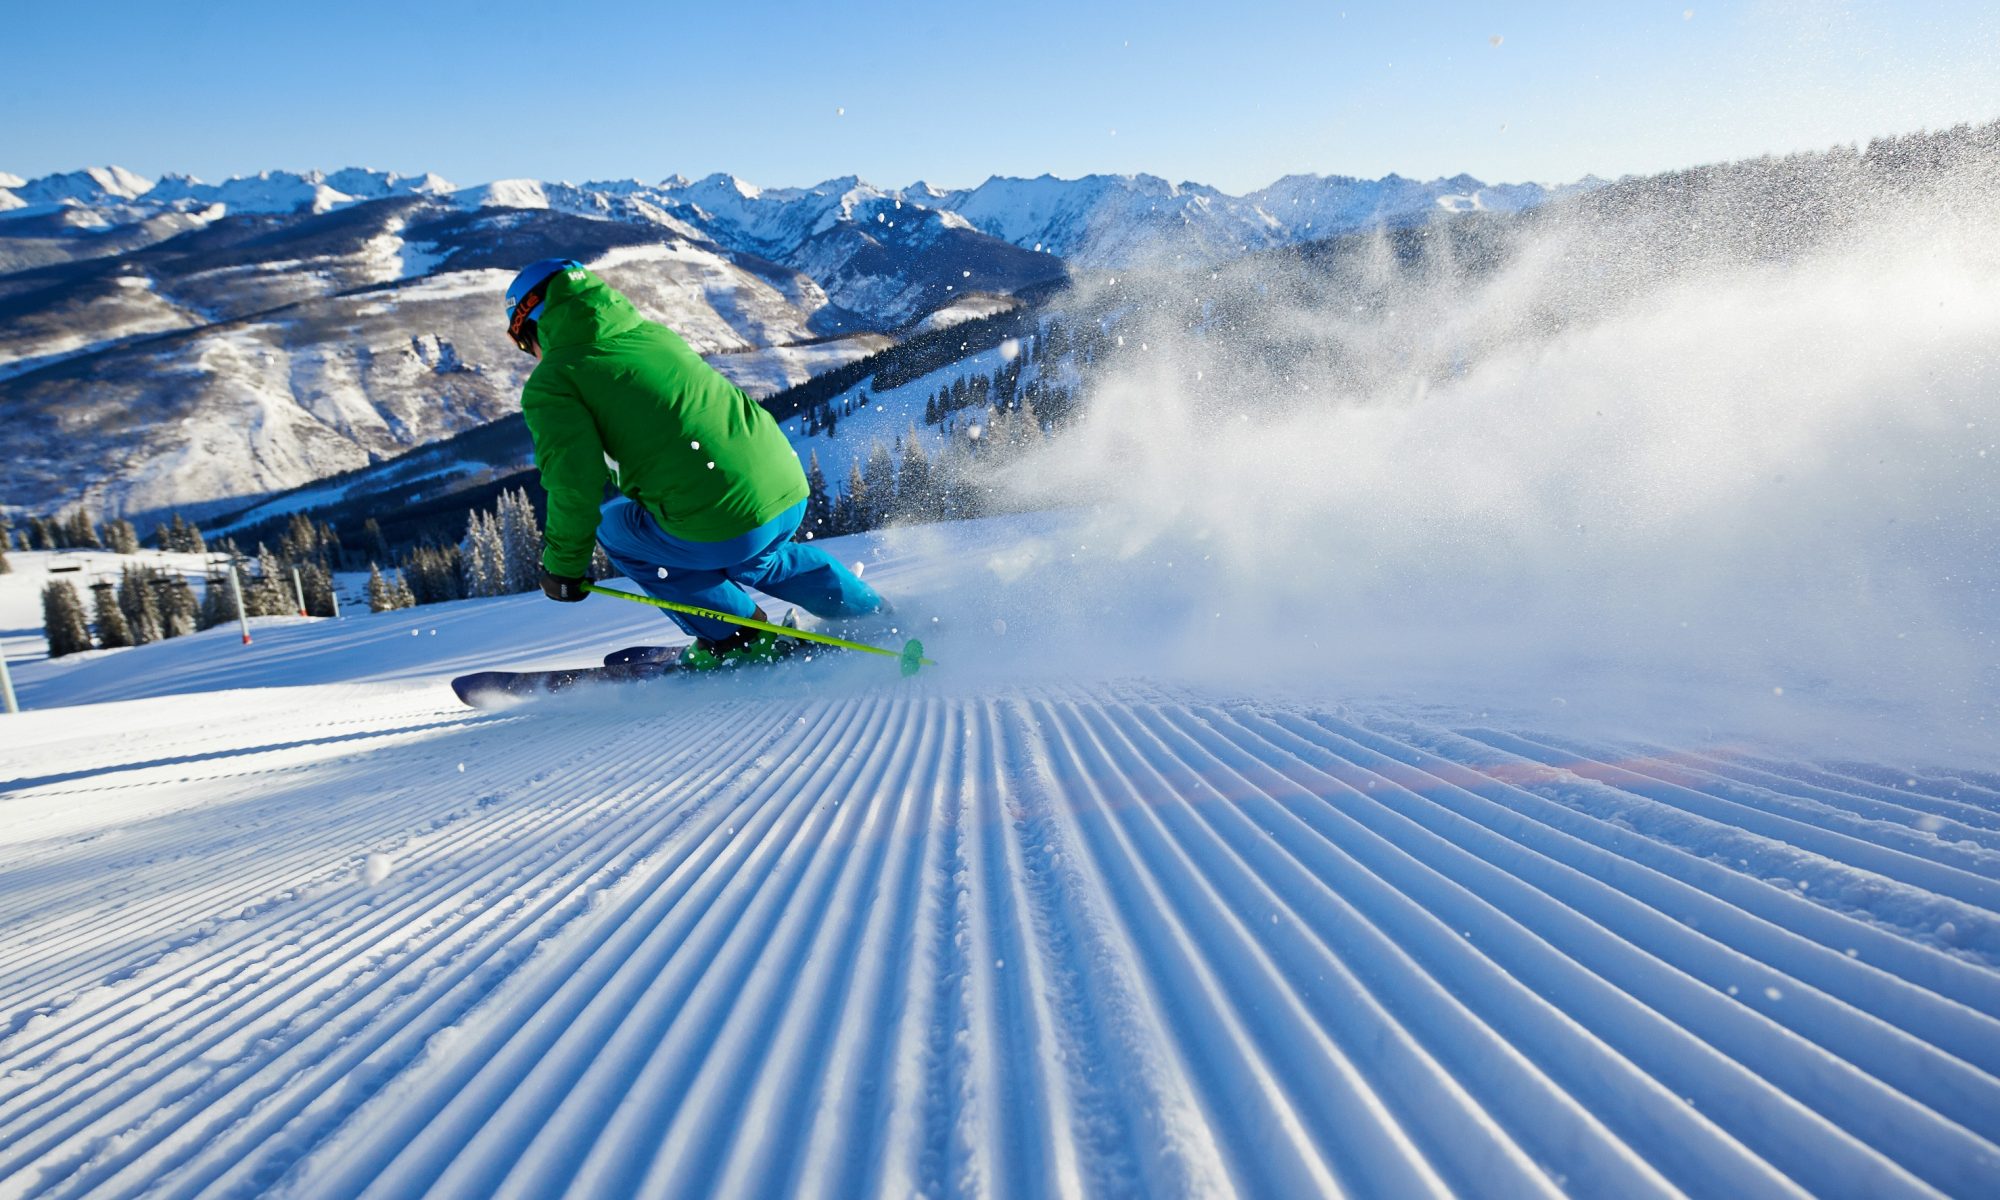 A groomed run in Vail Mountain. Photo- Jack Affleck. Vail Resorts Commits to $175 Million to $180 Million in Capital Investments to Reimagine the Guest Experience for the 2019-20 Season